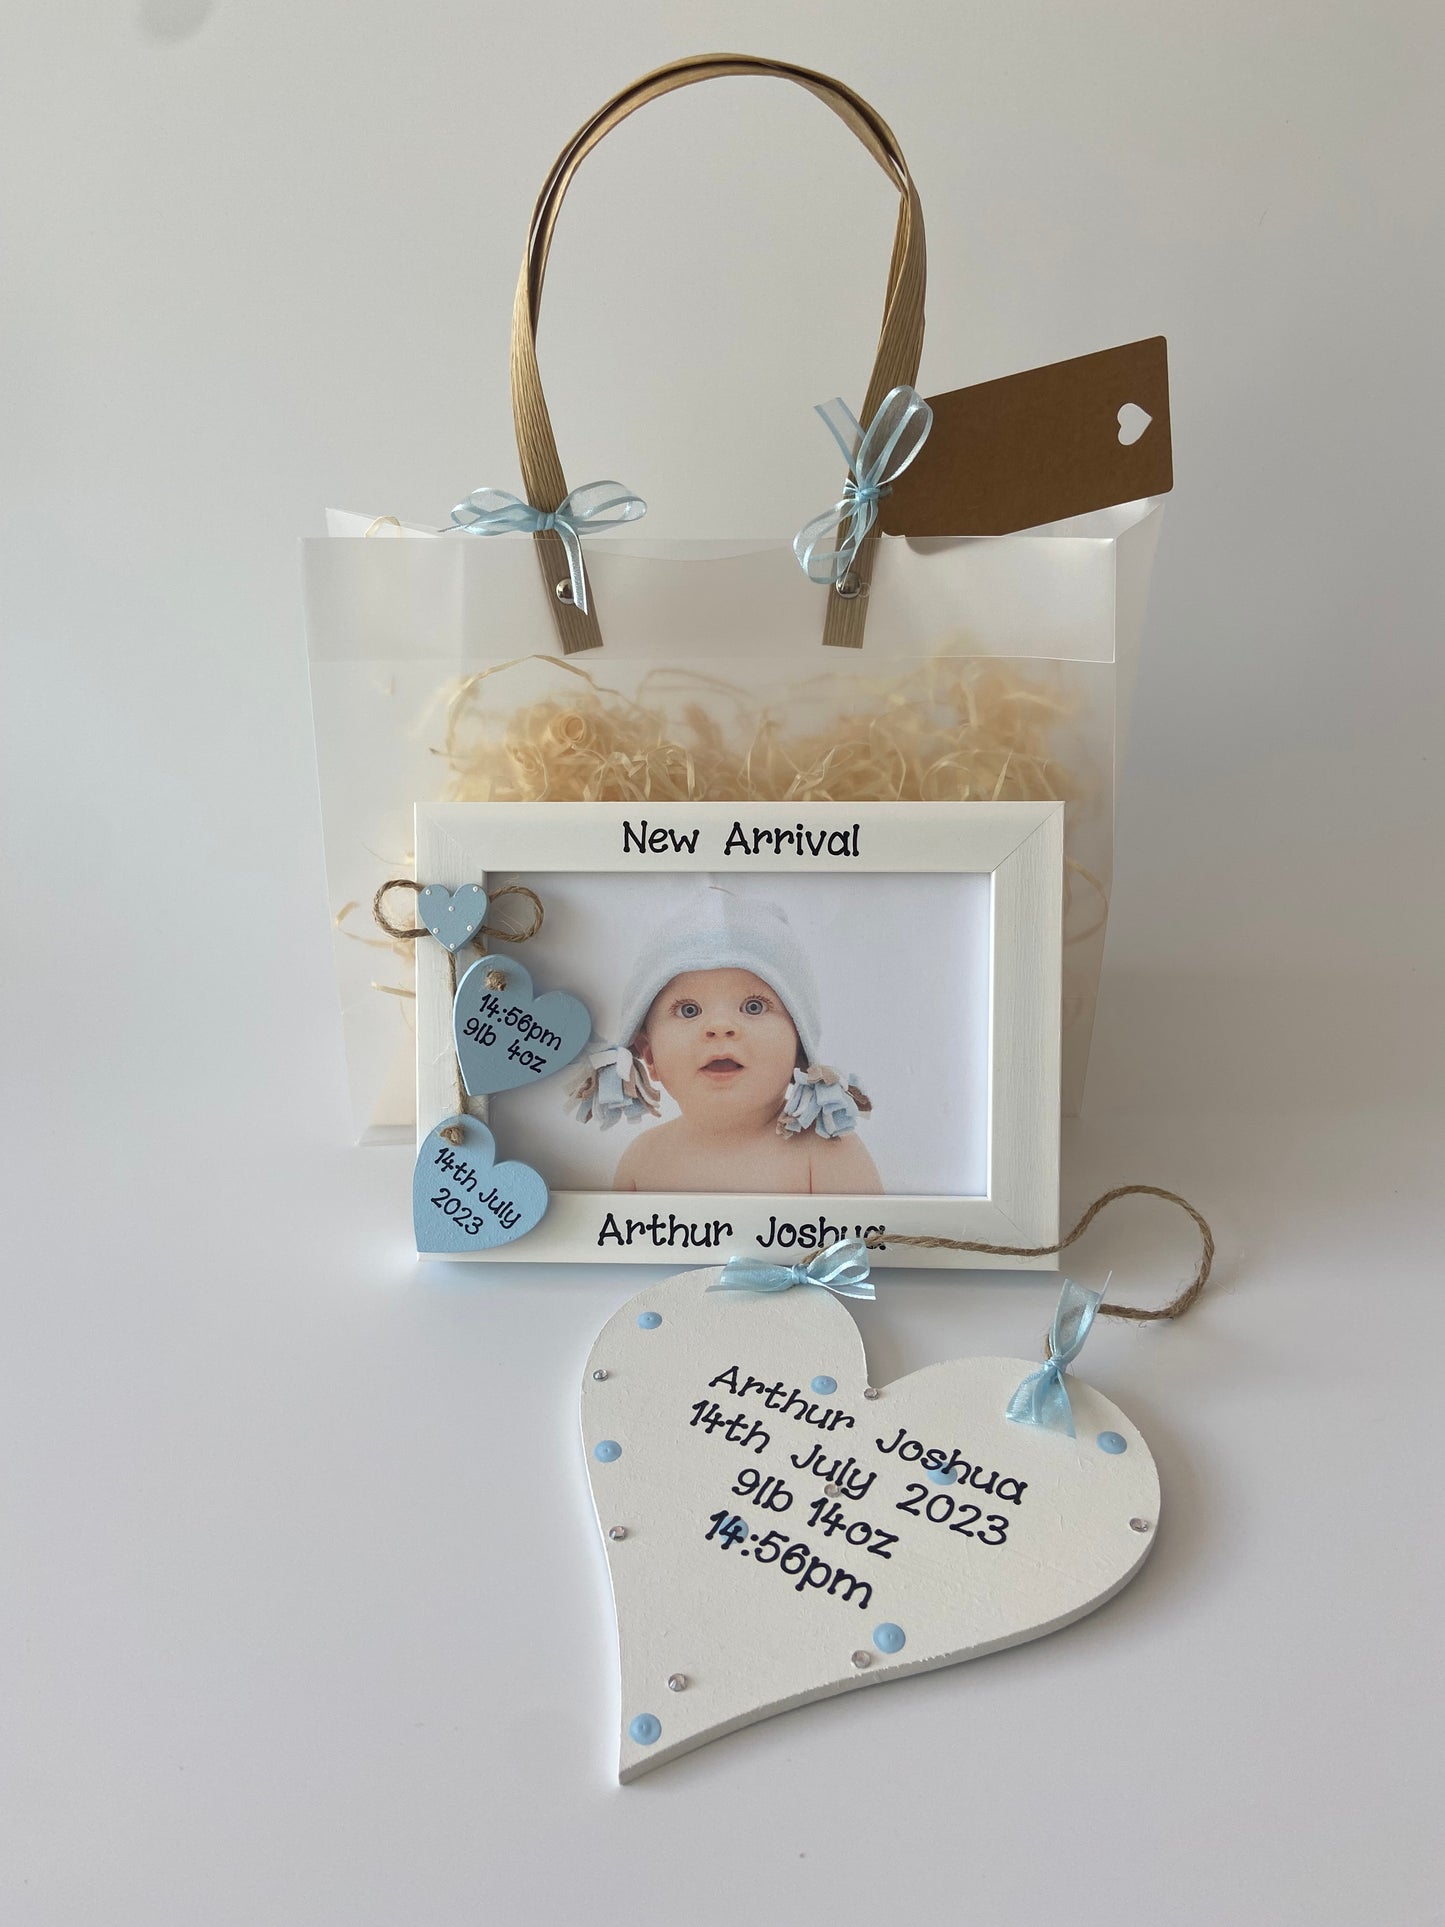 Image shows pairing new born baby photo frame and plaque, photo frame consists of two hanging hearts with baby's date of birth, time of birth and weight, also includes a small heart placed above with white polka dots. Plaque decorated with polka dots, gems and ribbon. Gift wrap and photo of ur choice also included.